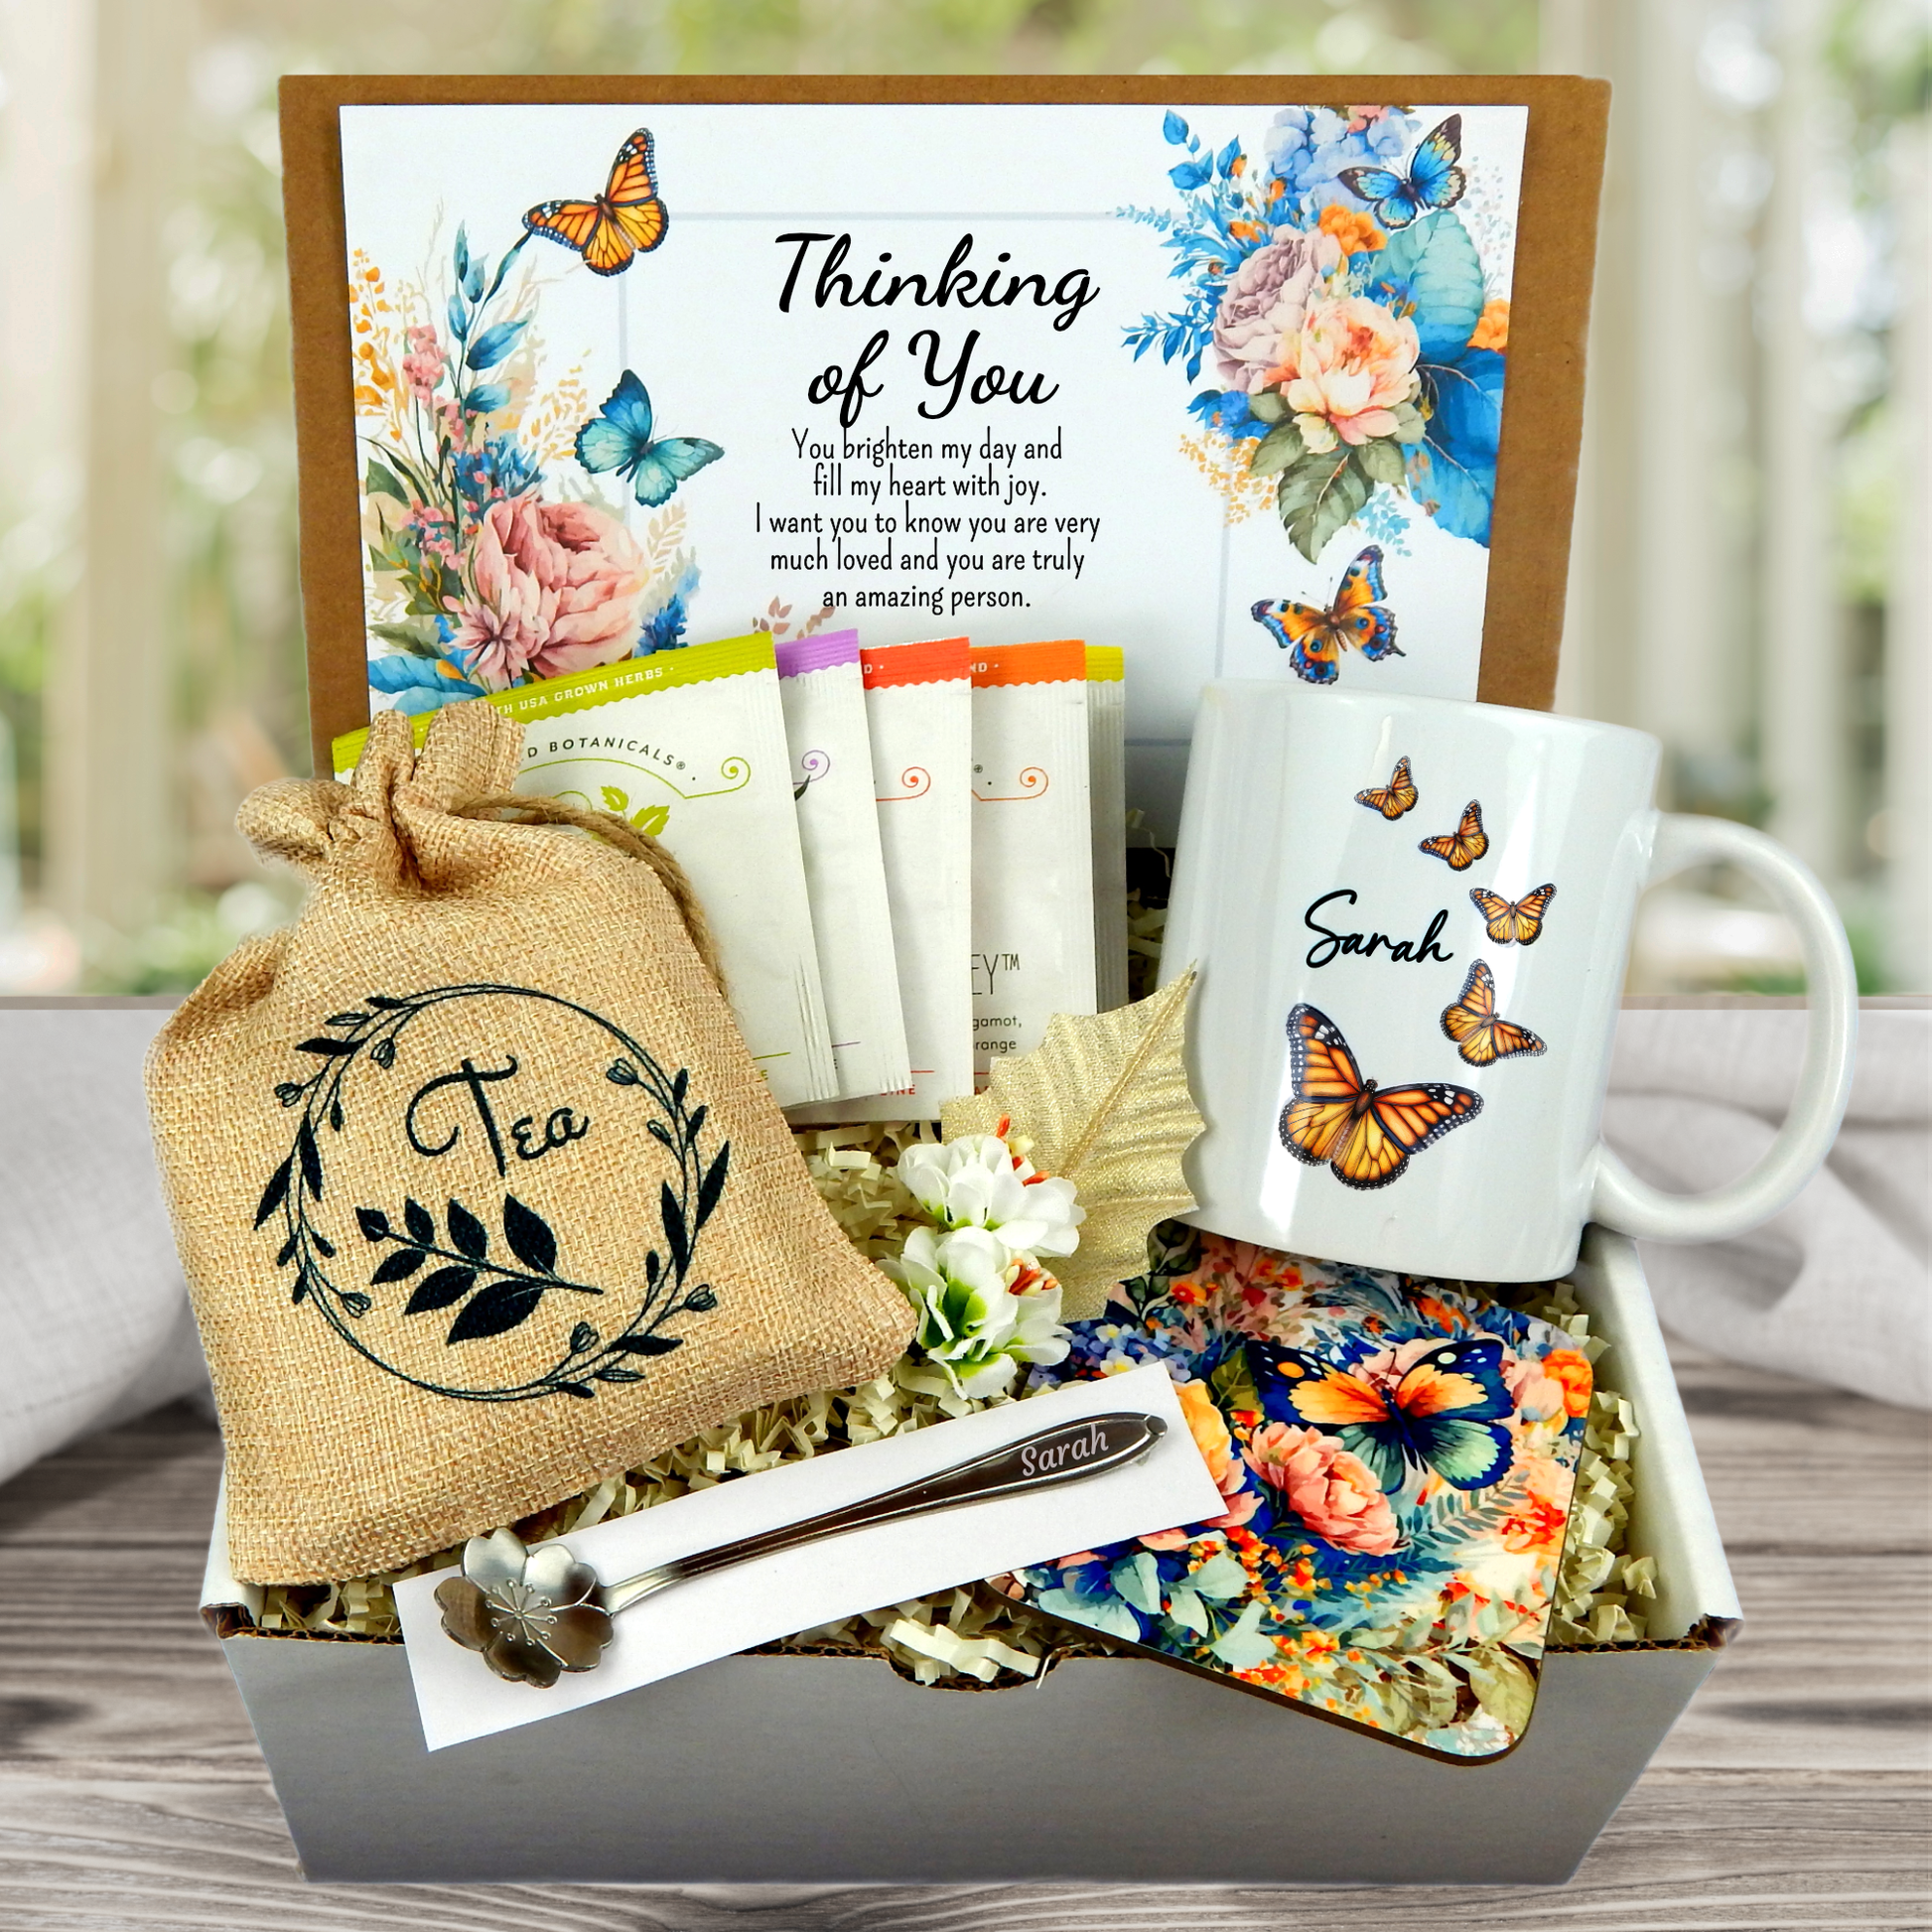 butterfly themed thinking of you gift with custom mug, assortment of teas, coaster, meaningful card, floral design